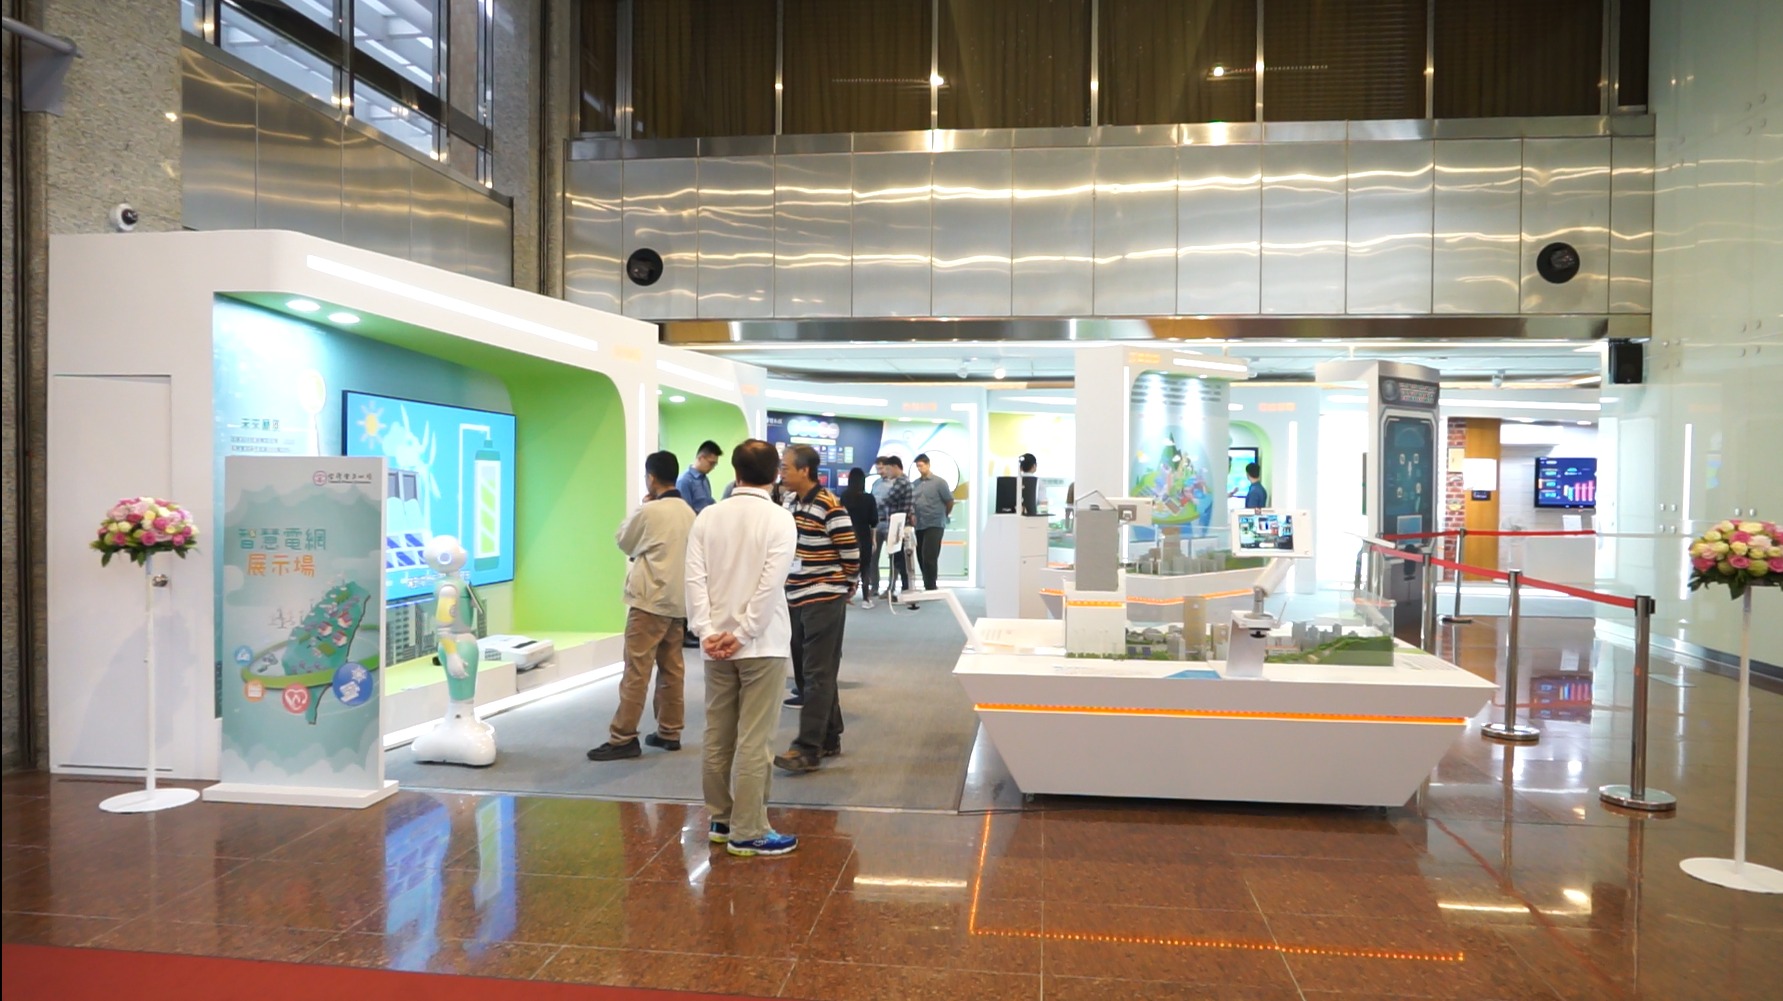 Commercial space design case recommendation - Taipower Smart Grid Exhibition Center